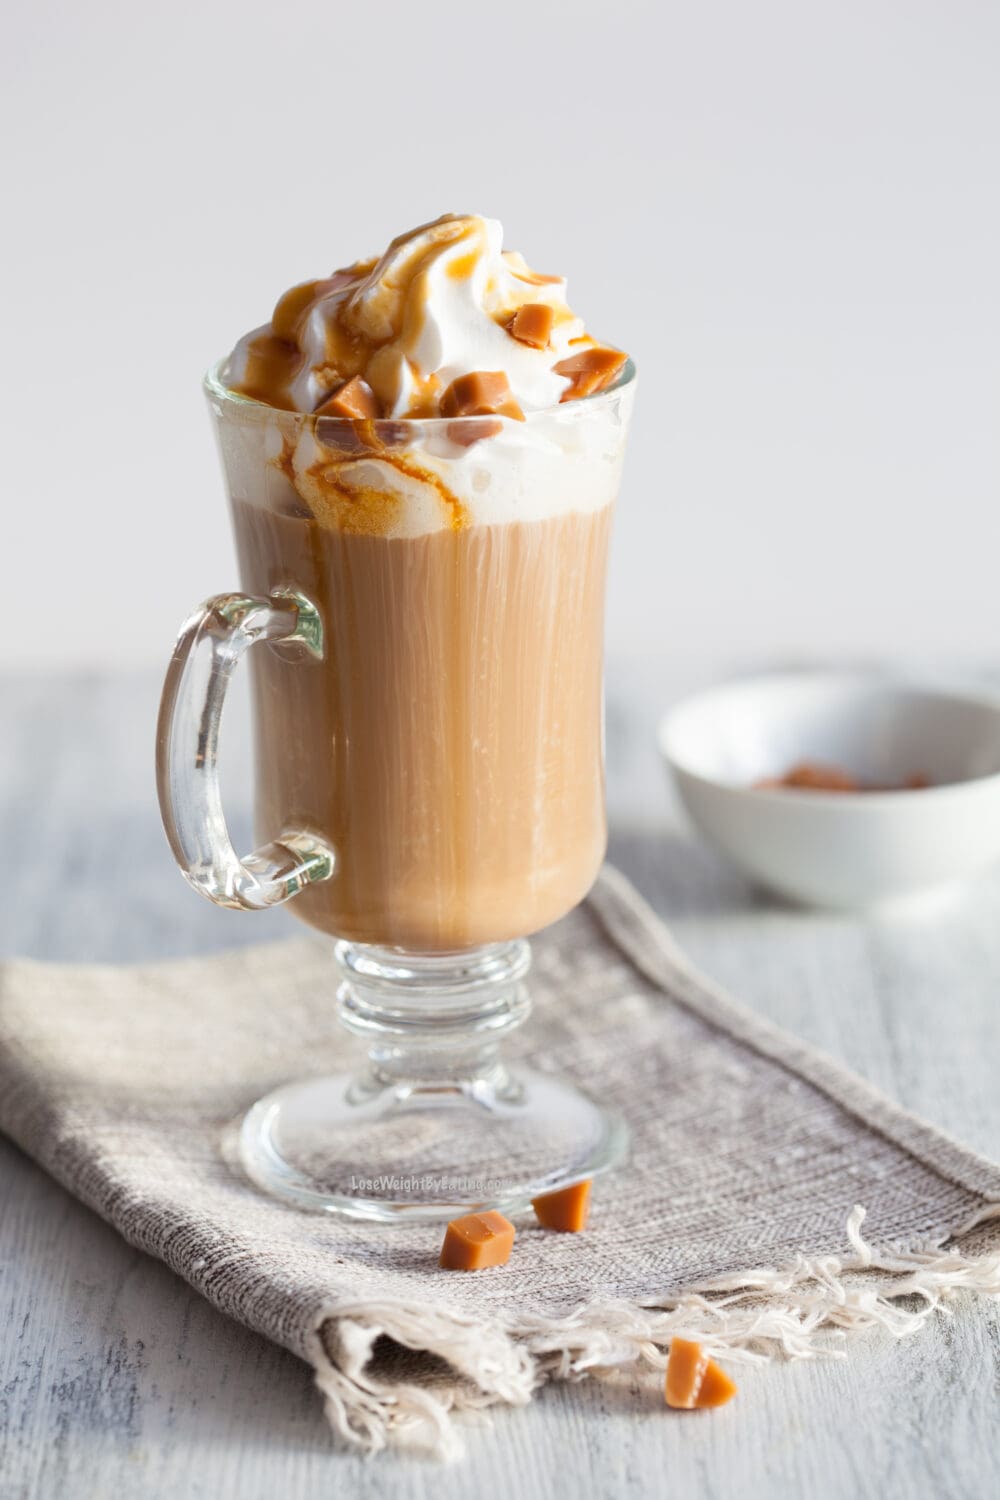 Low Calorie High Protein Lattes